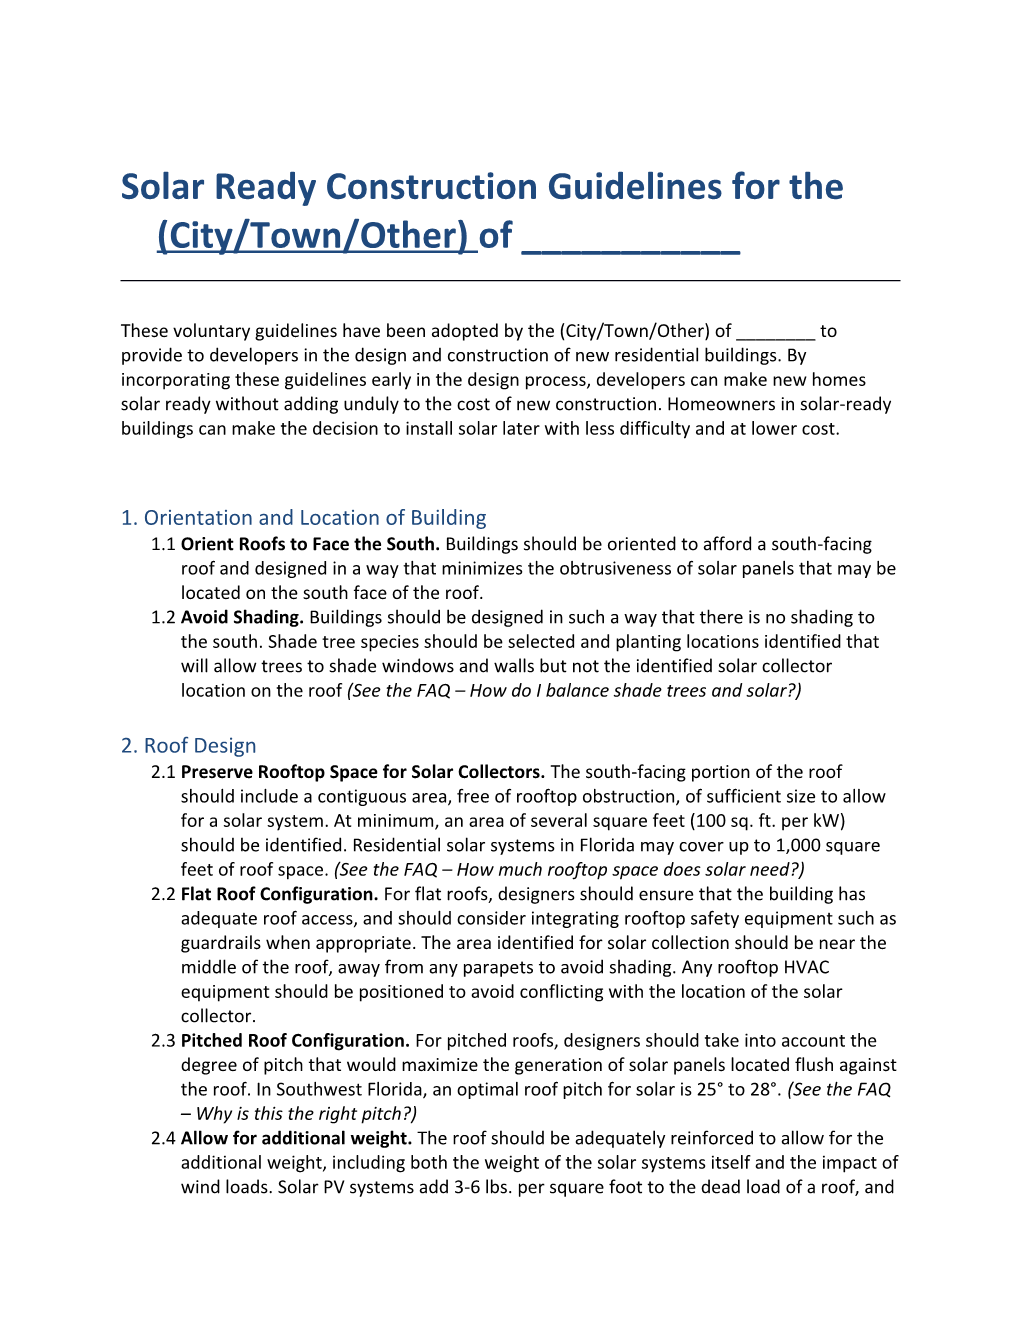 Solar Ready Construction Guidelines for the (City/Town/Other) of ______